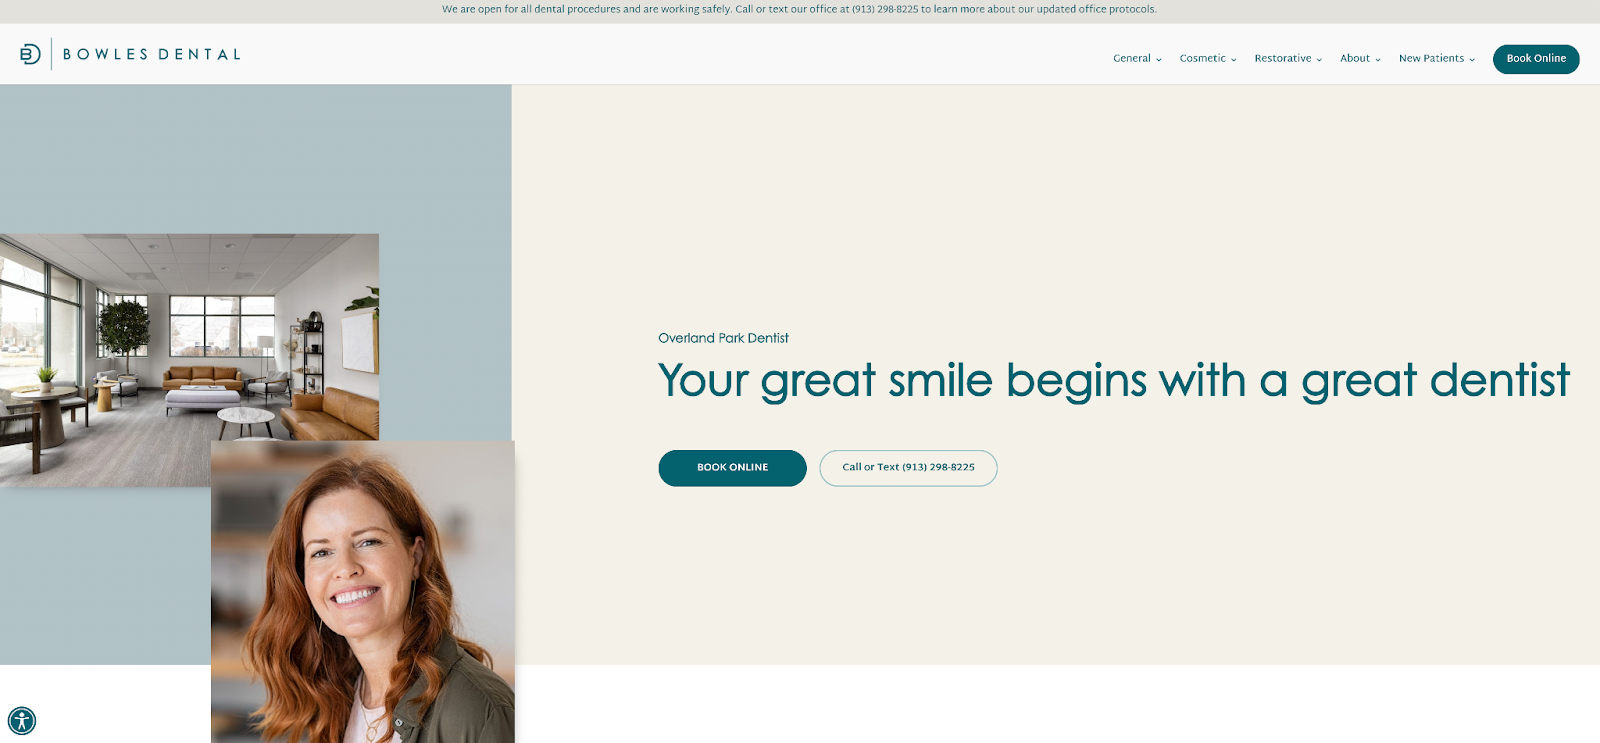 The Bowles Dental dental website has a lot to love about it for anyone designing a dental website of their own